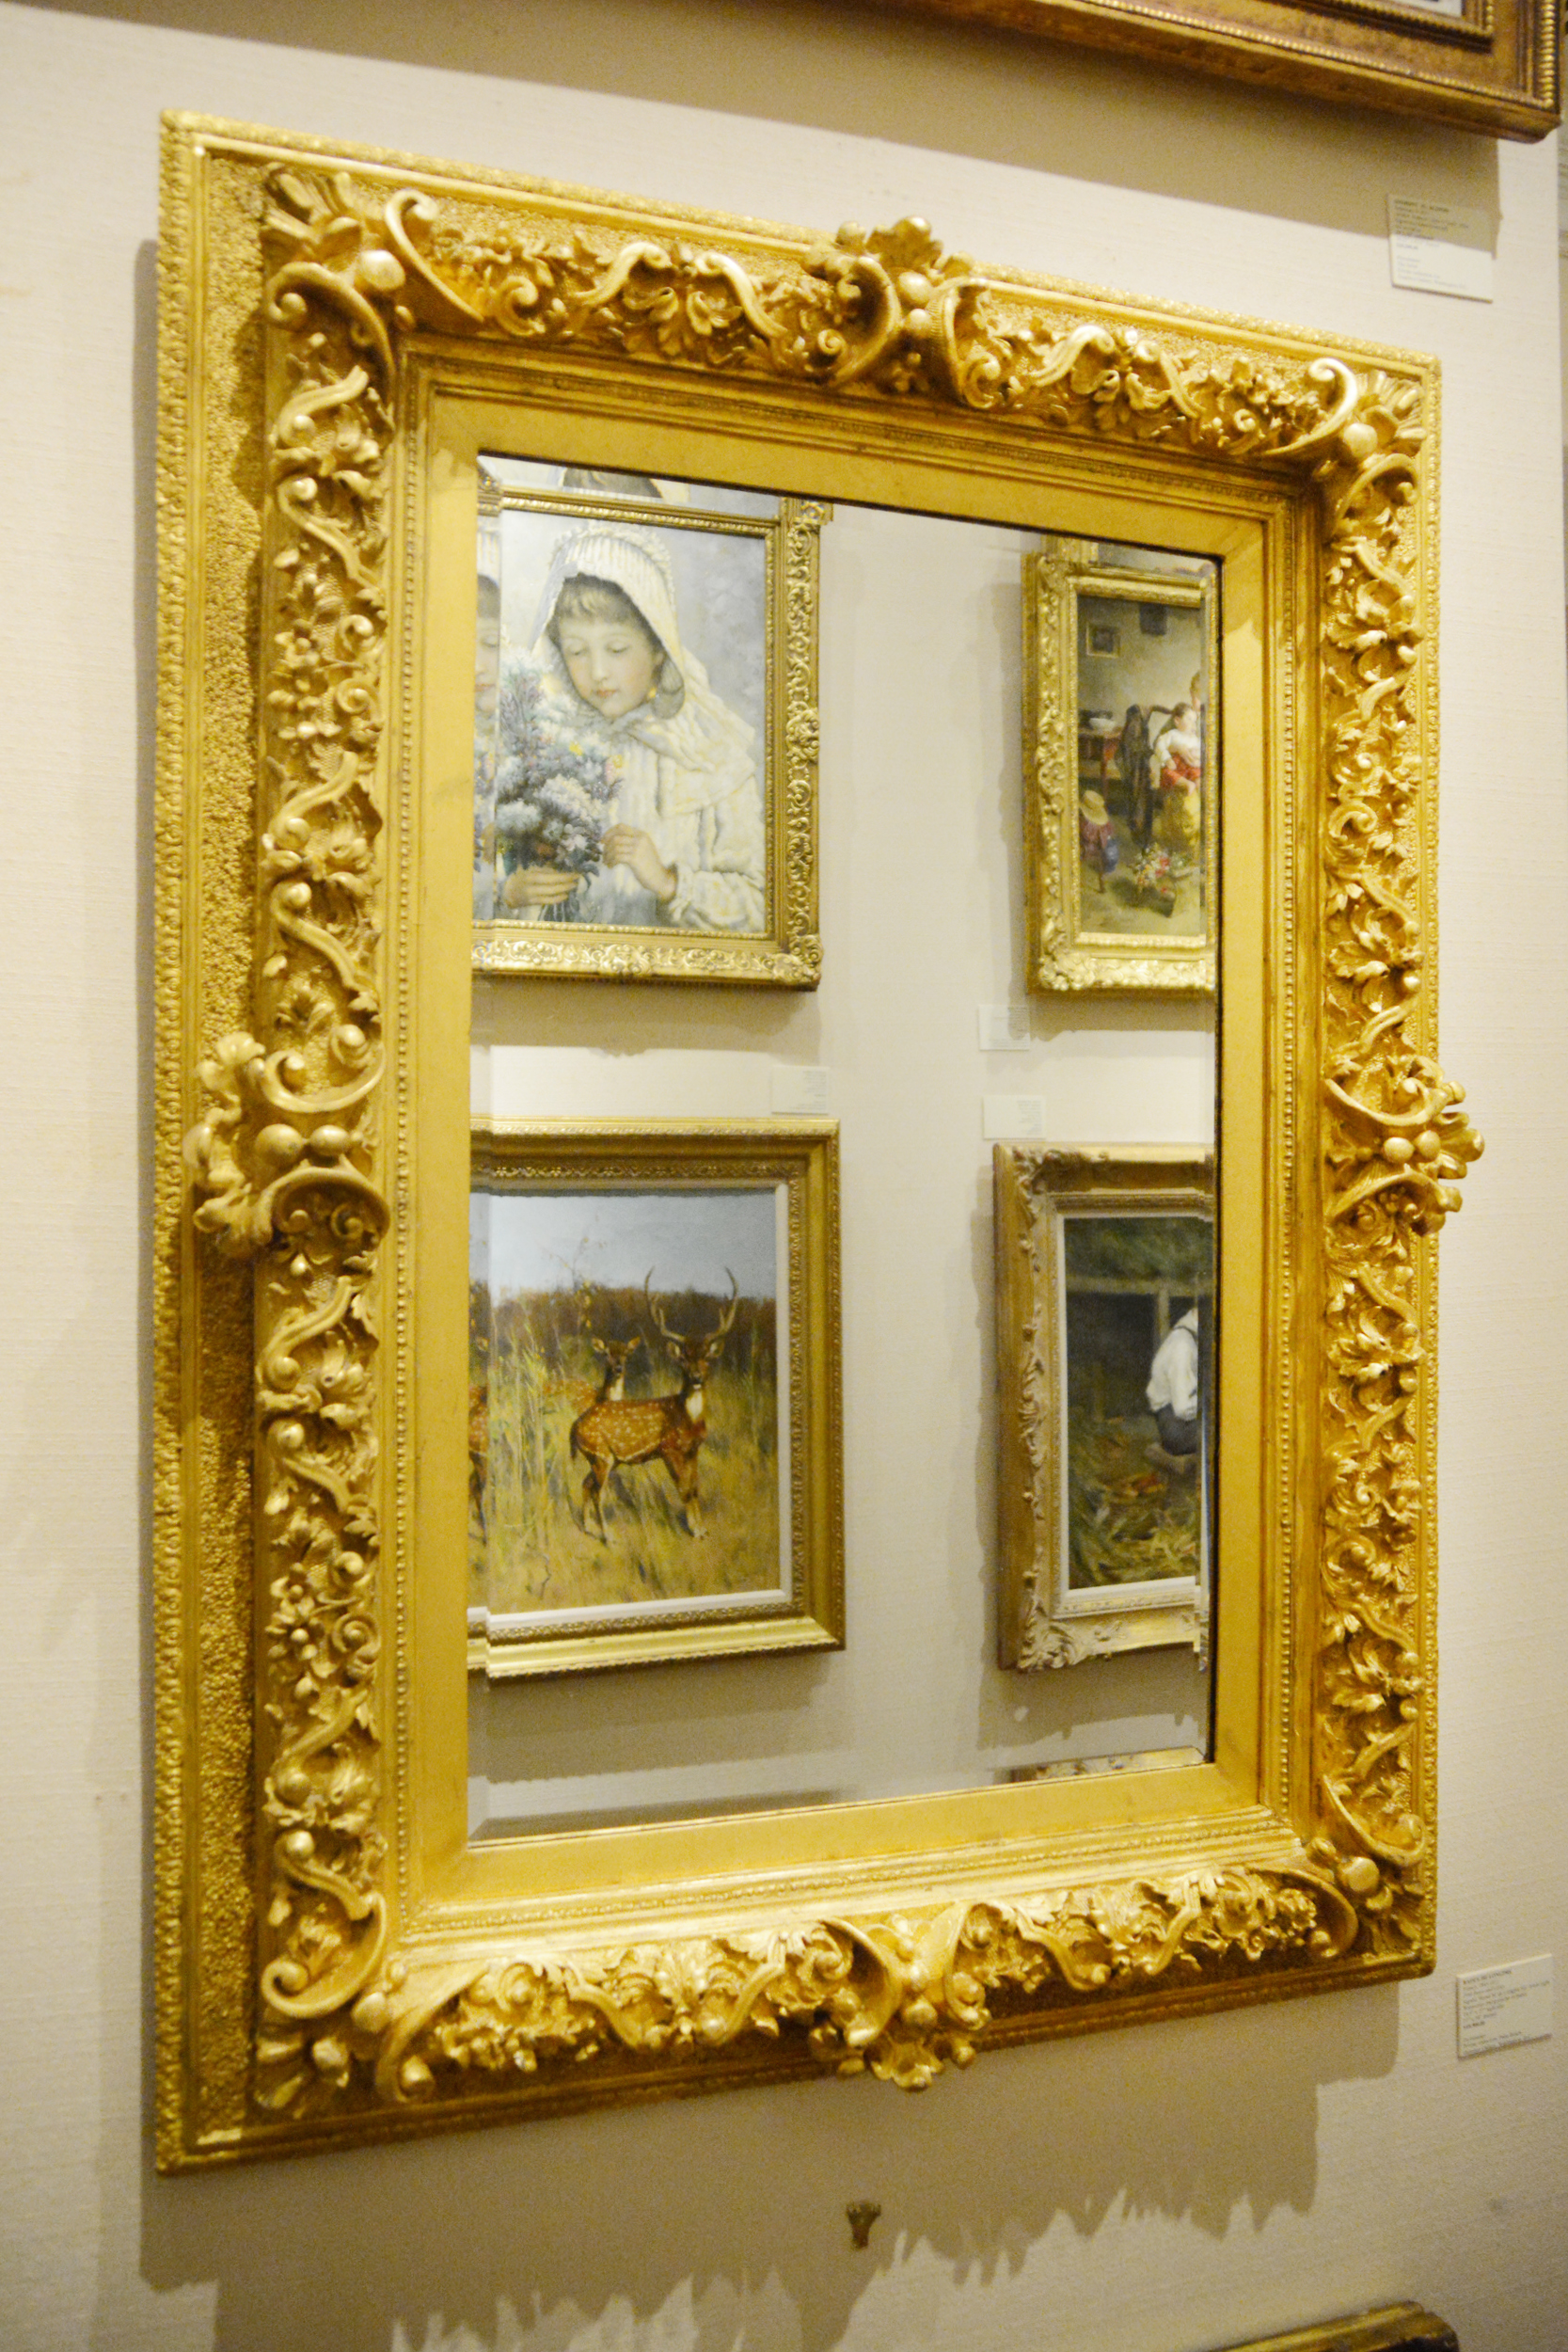 French 19th-century, Barbizon-style, composition and gilded wood frame with mirror (and decorative scroll centers) 